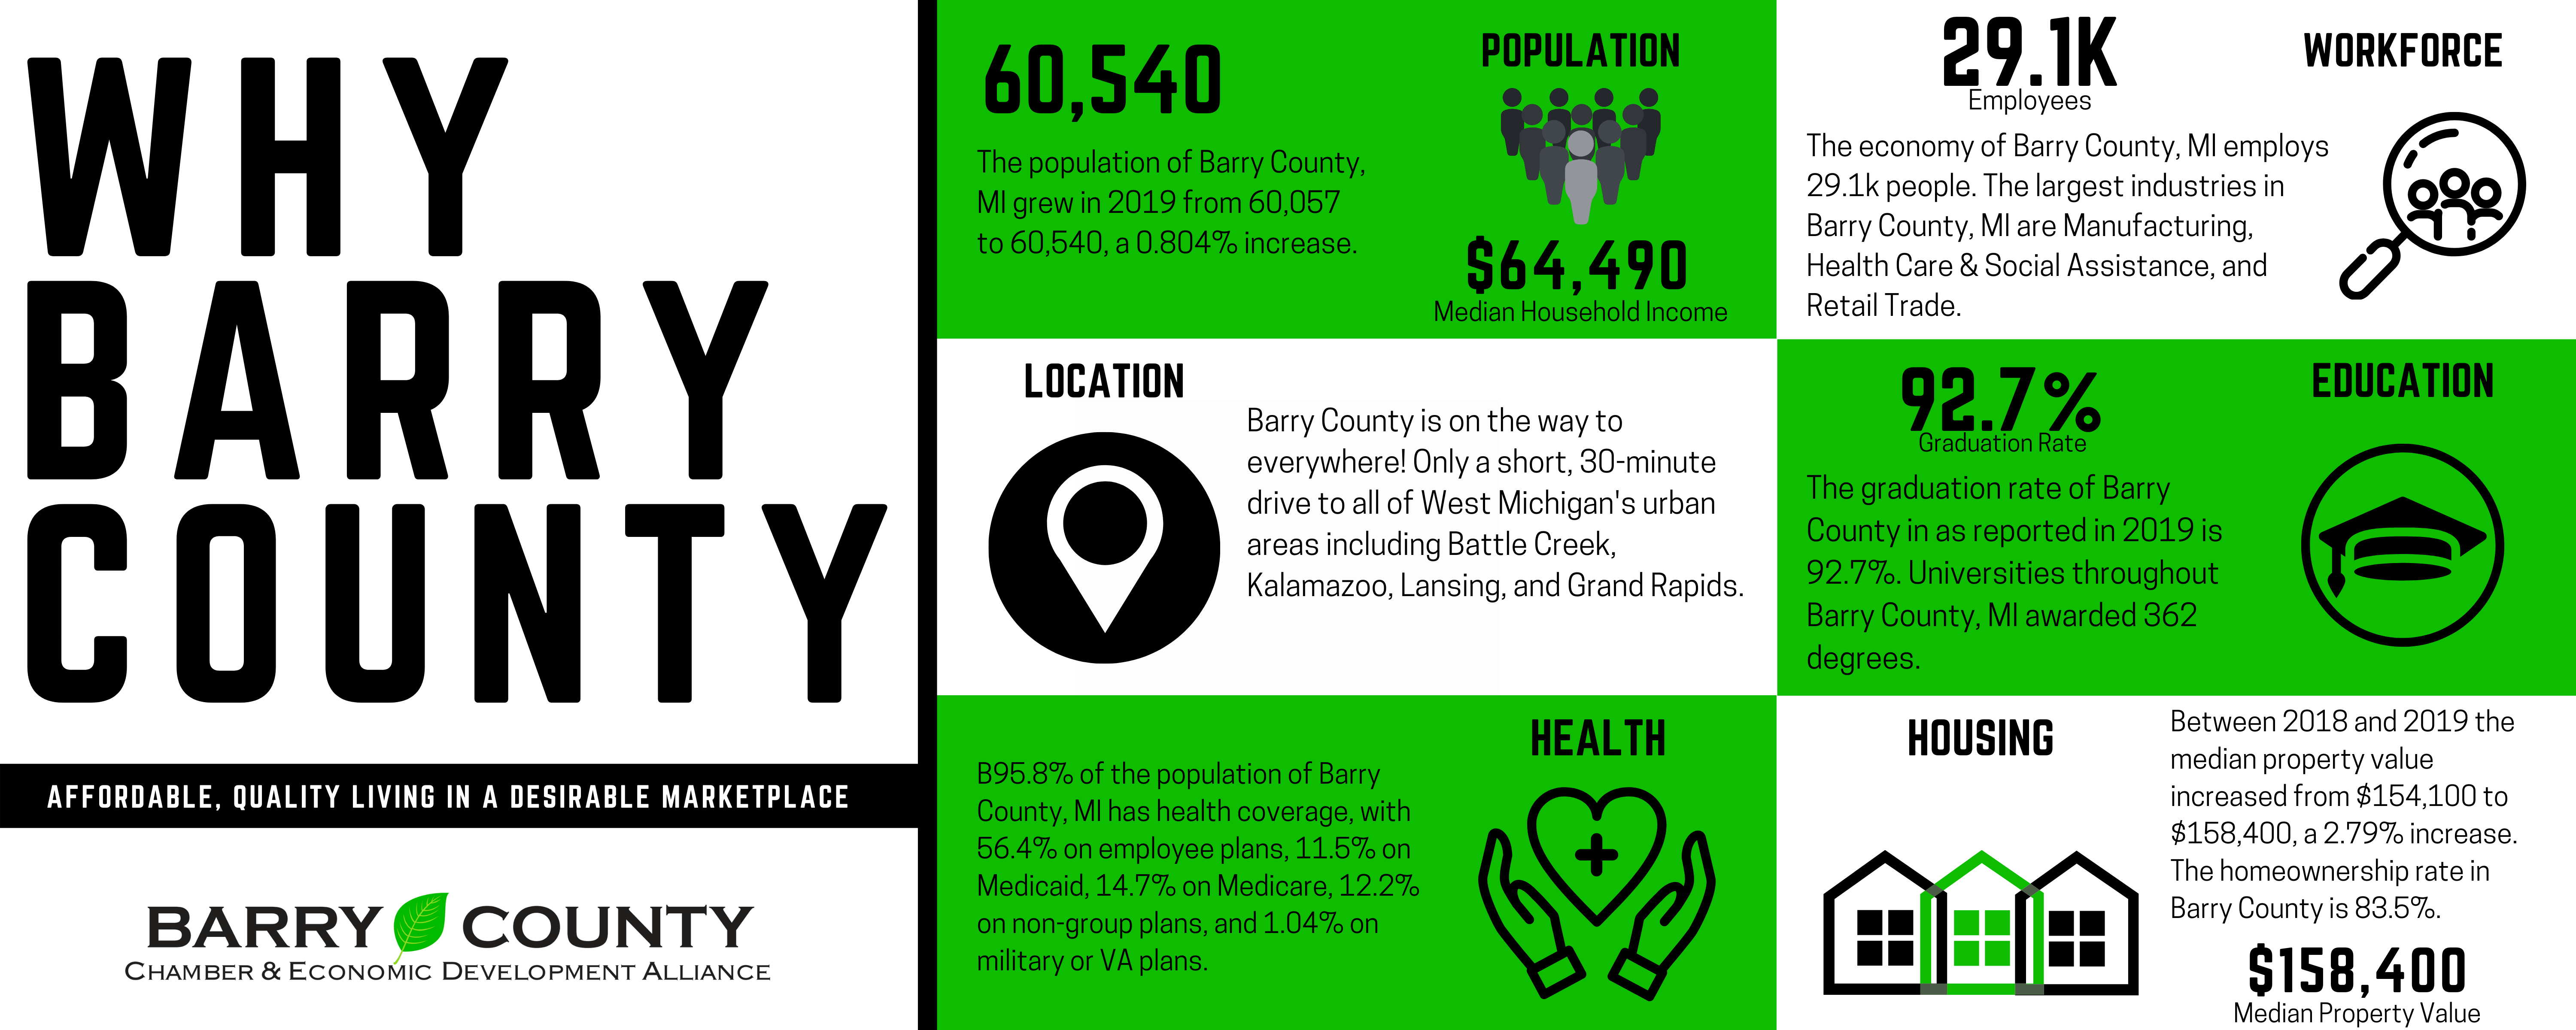 Why Barry County Inforgraphic